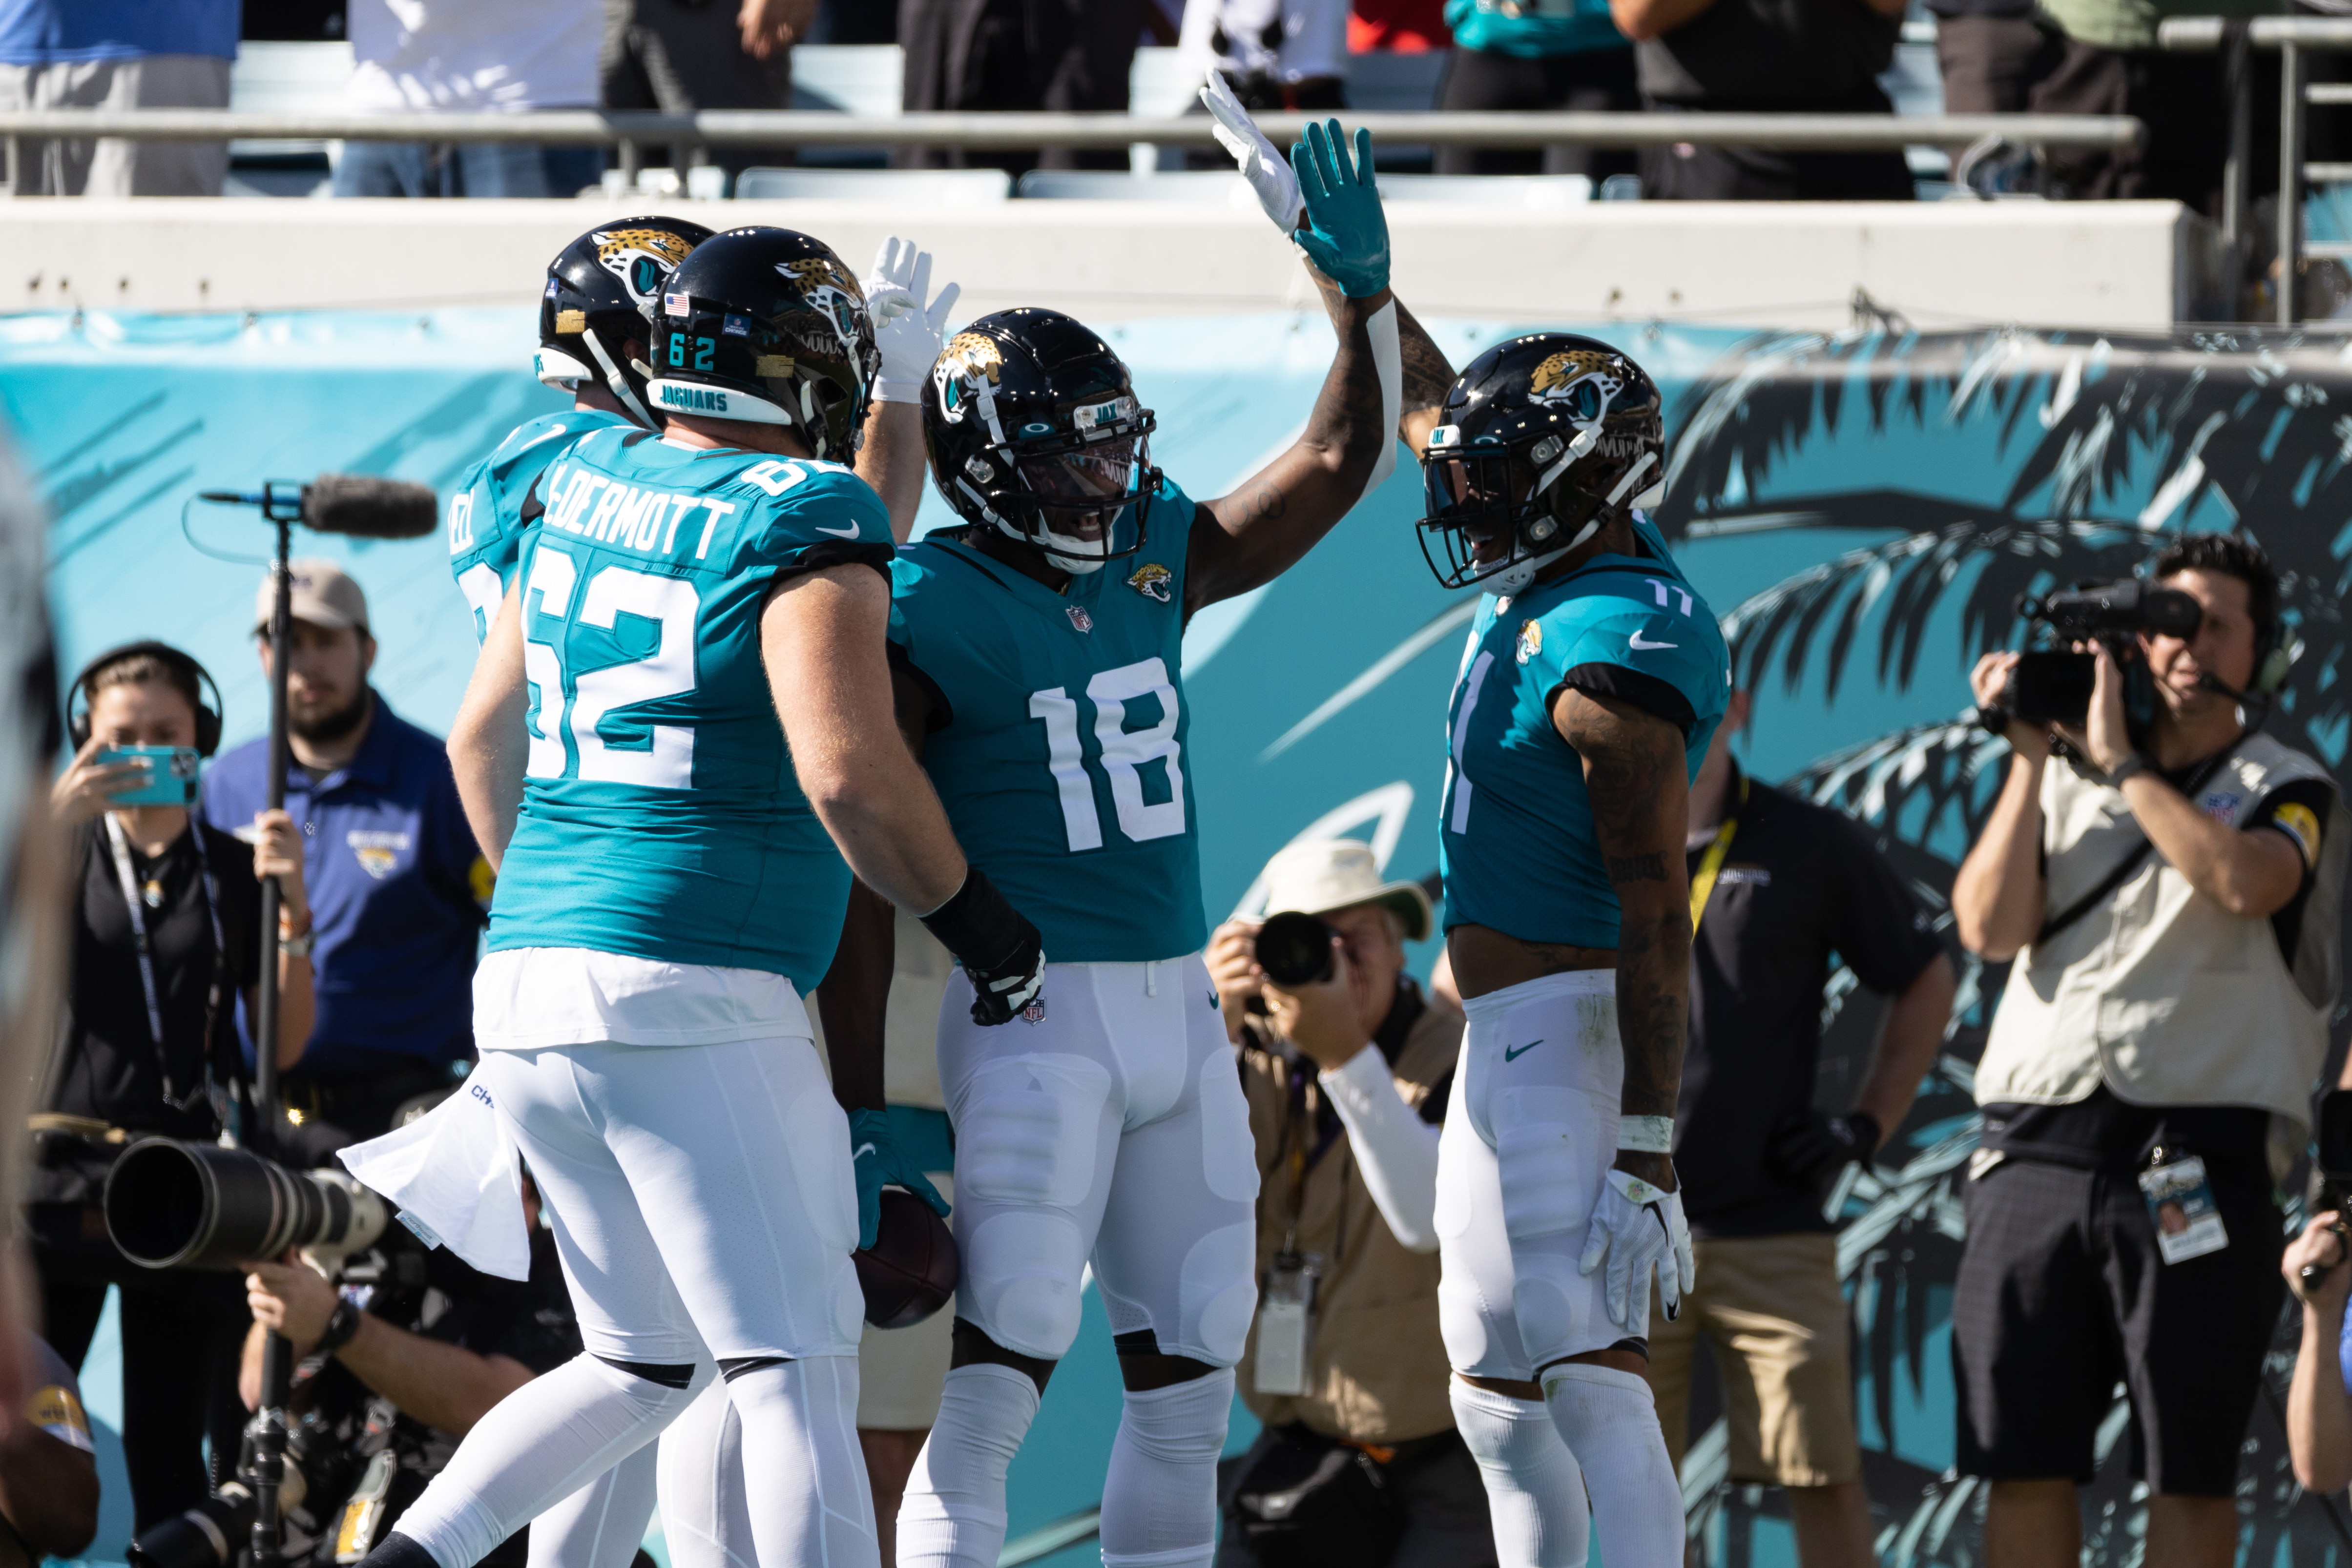 Jacksonville Jaguars wide receiver Laquon Treadwell (18) celebrates after scoring a touchdown during the first half against the Indianapolis Colts at TIAA Bank Field.